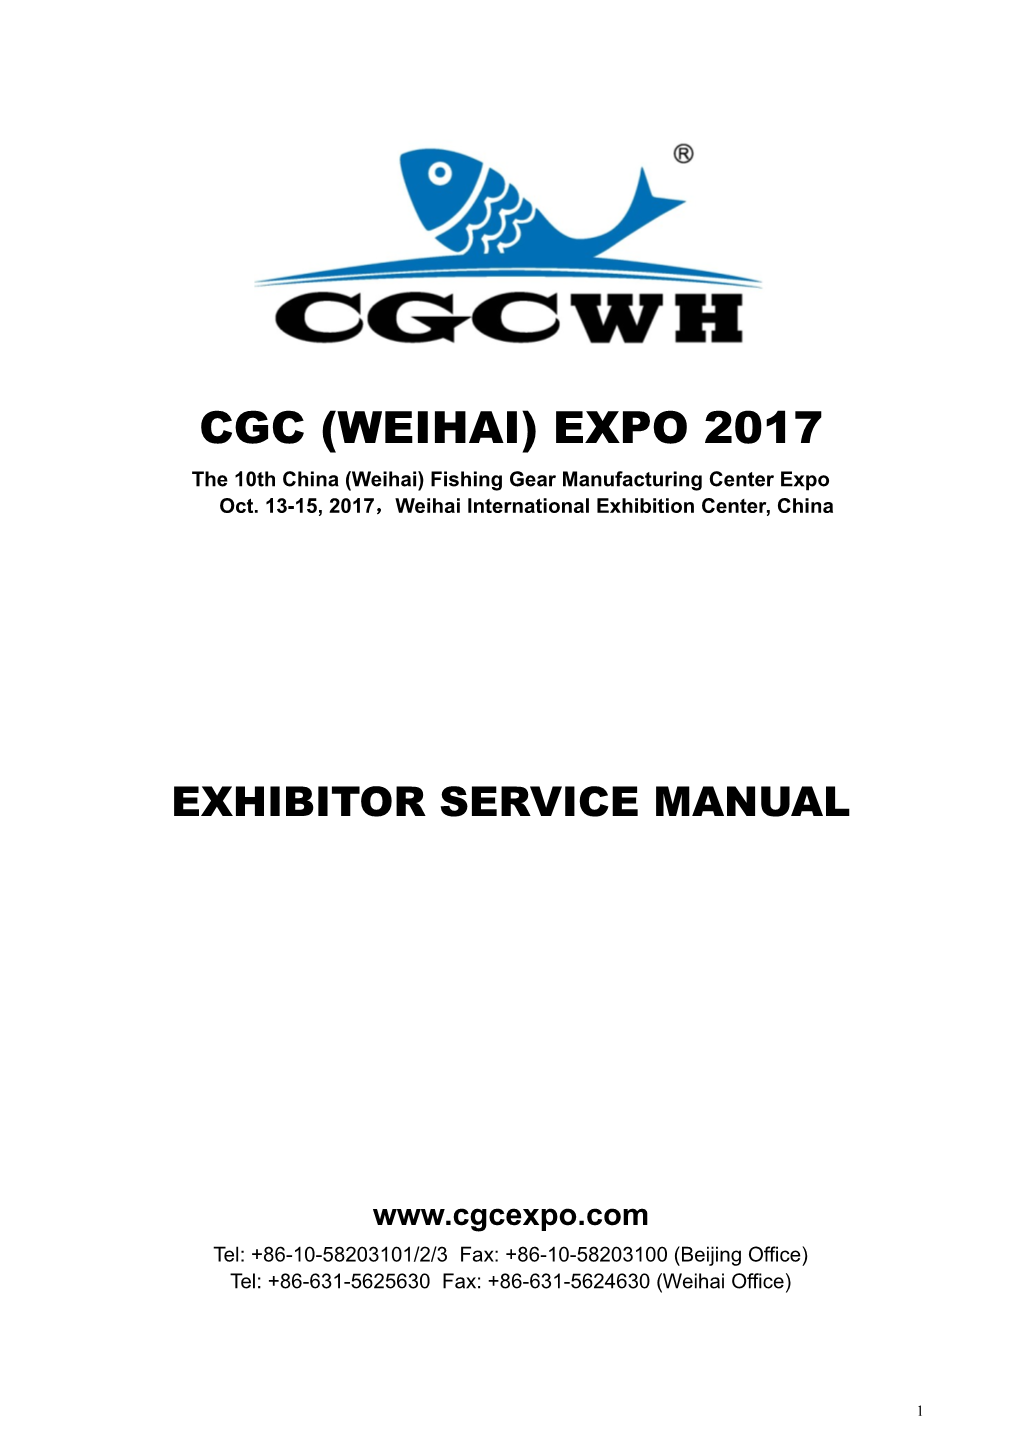 The 10Th China (Weihai) Fishing Gear Manufacturing Center Expo